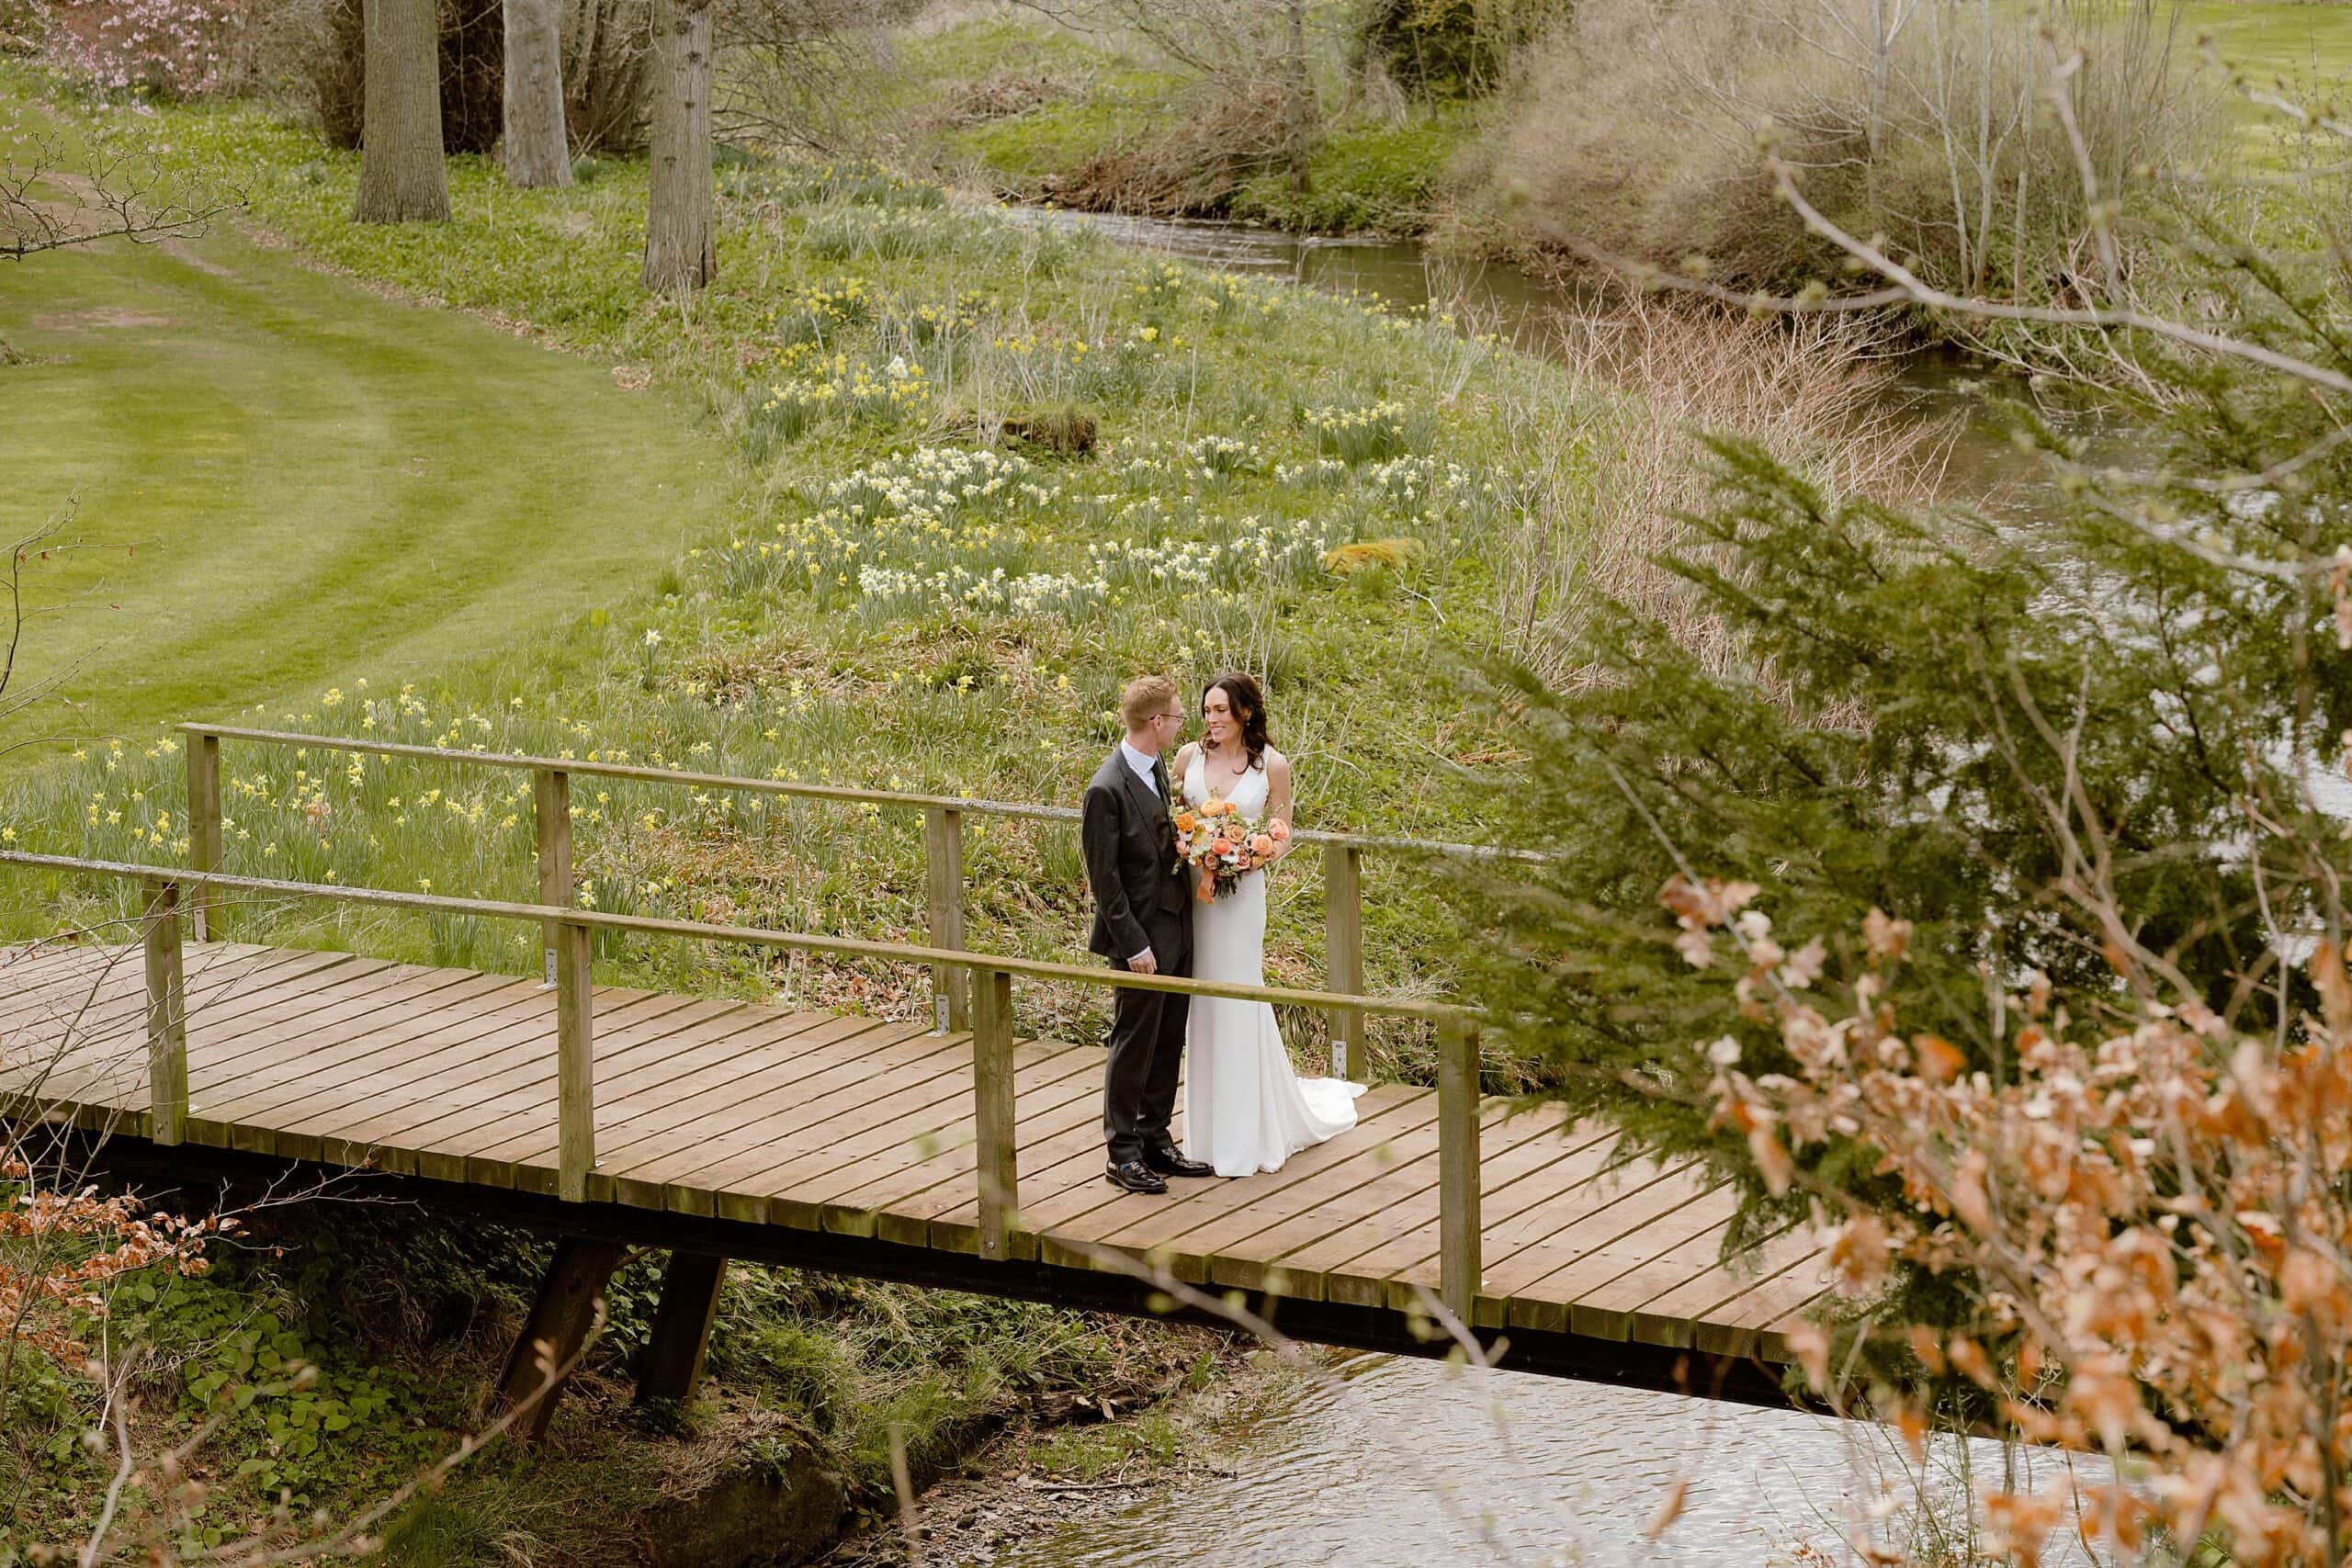 the bride and groom standing on a wooden bridge over a stream with lawn and trees in the background following their unusual wedding venues east lothian wedding ceremony near edinburgh scotland